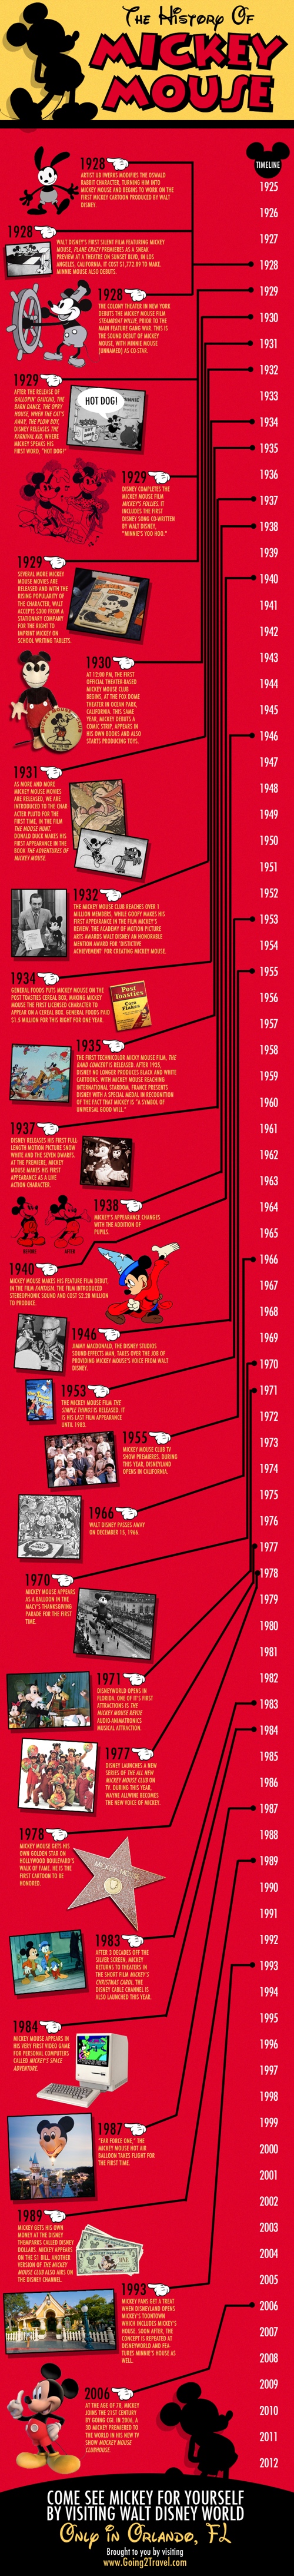 Sejarah Mickey Mouse (Infographic)